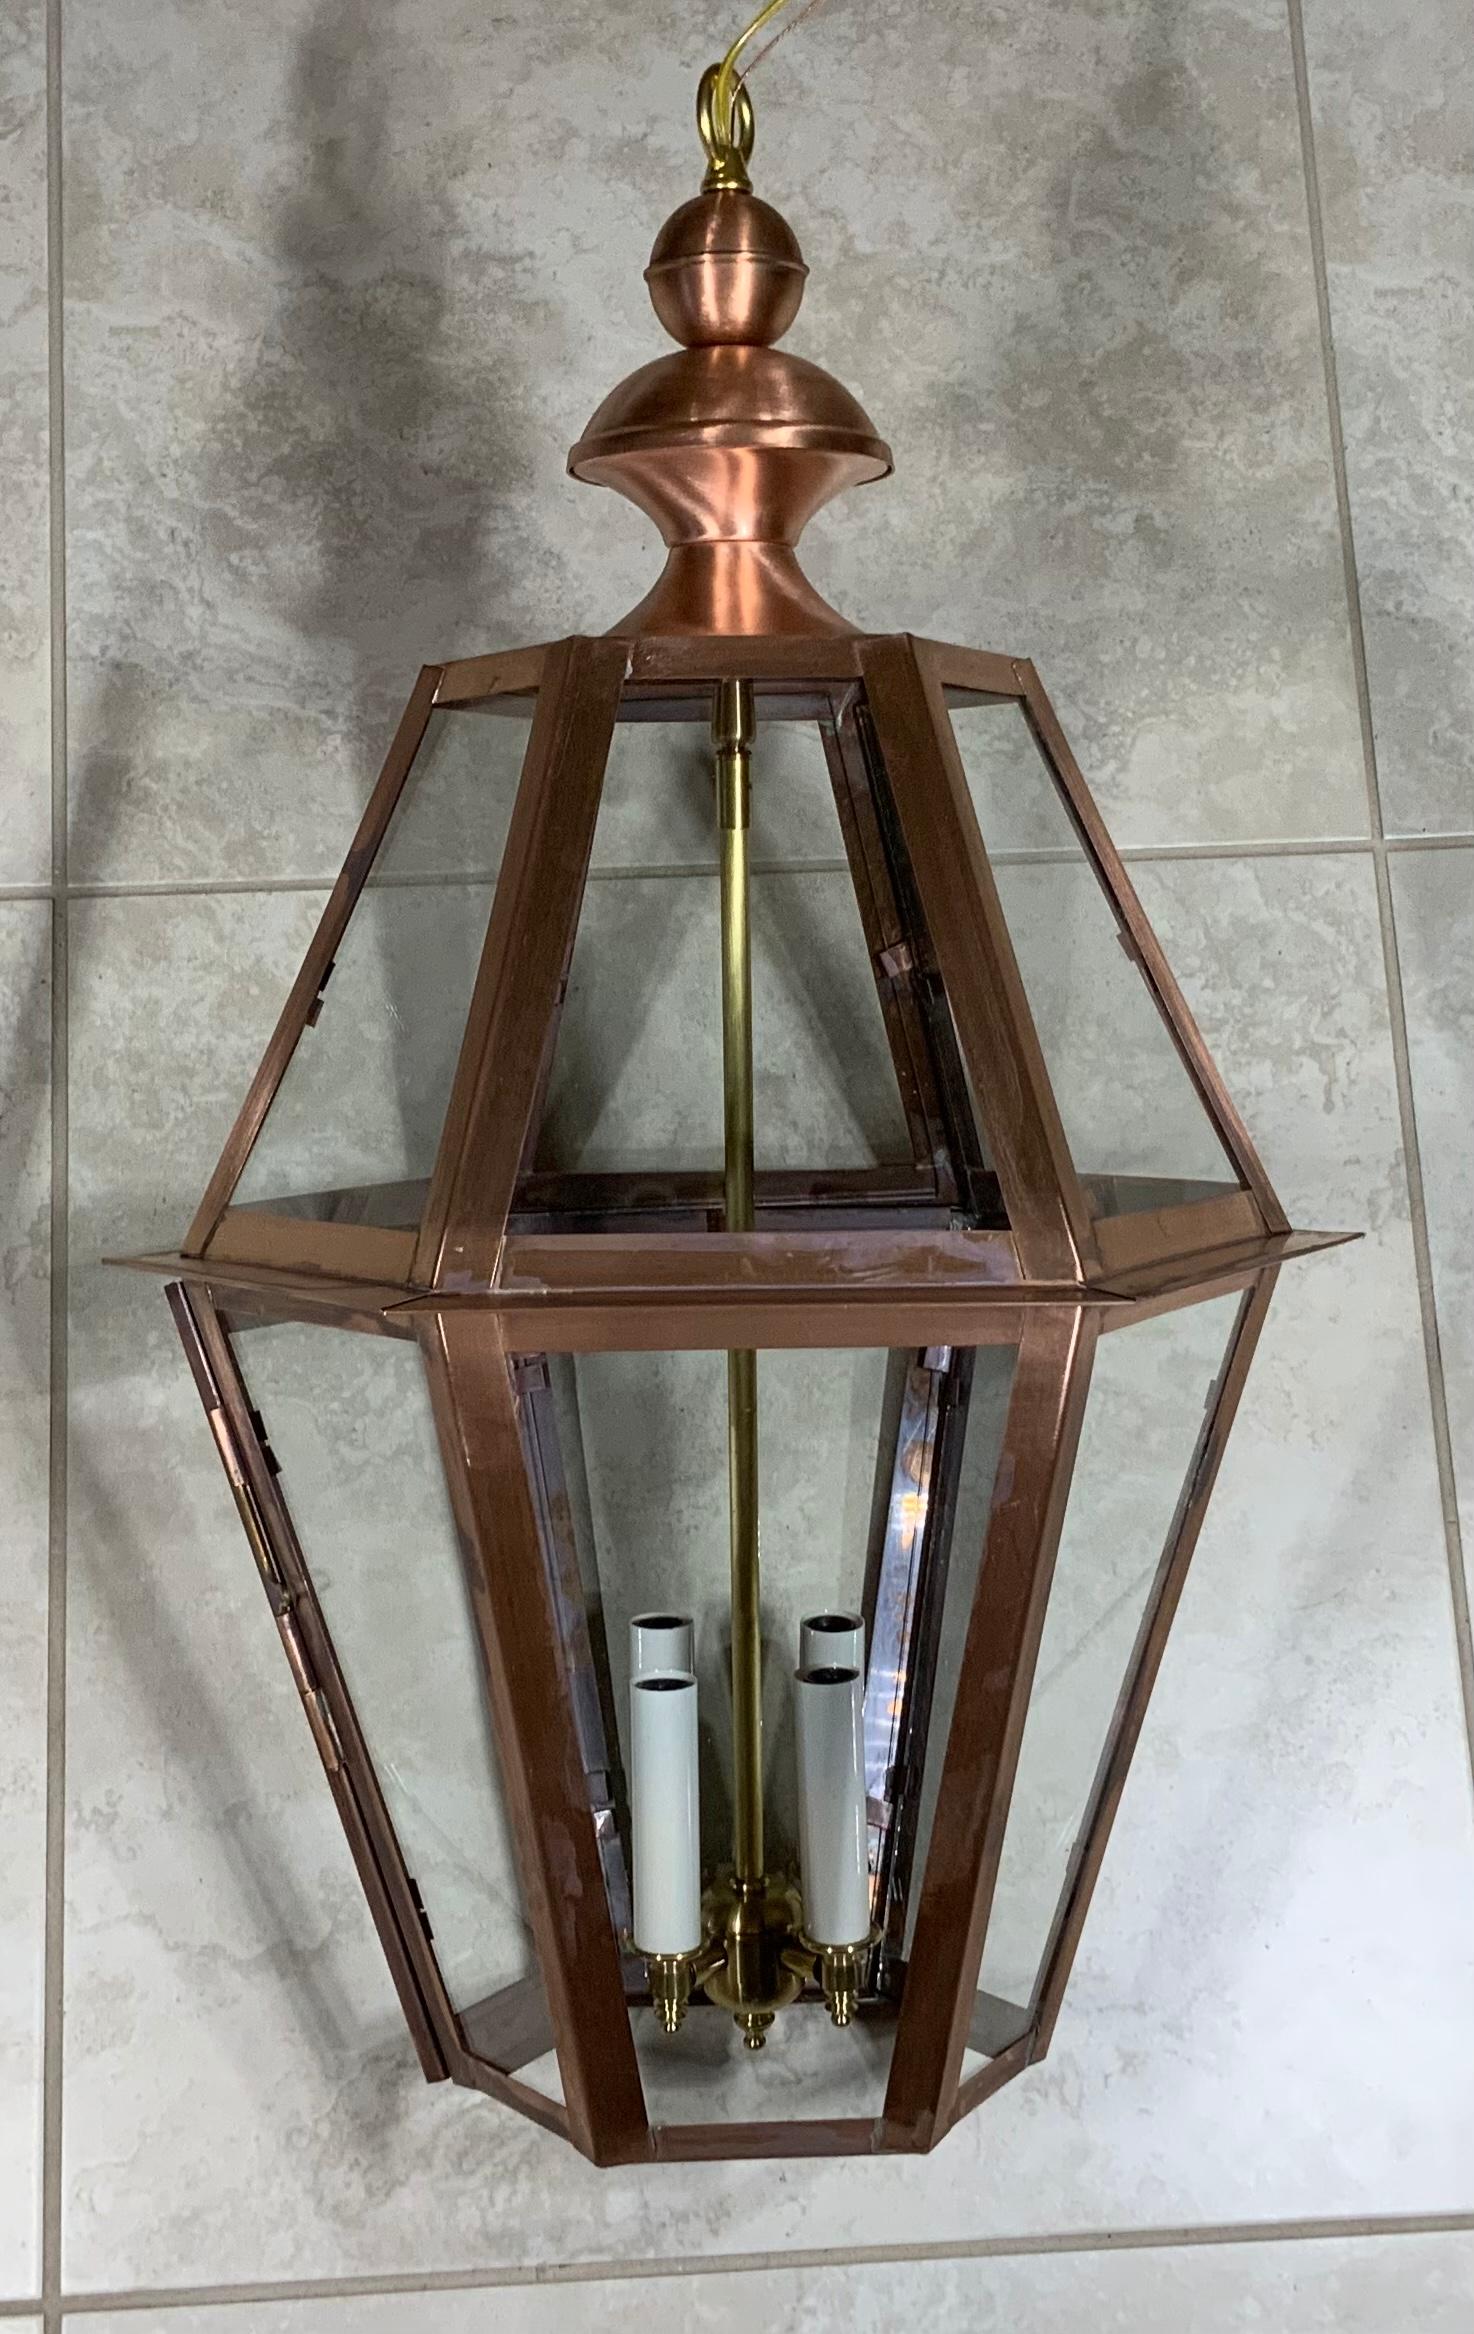 American Handcrafted Six Sides Solid Copper and Brass Hanging Lantern